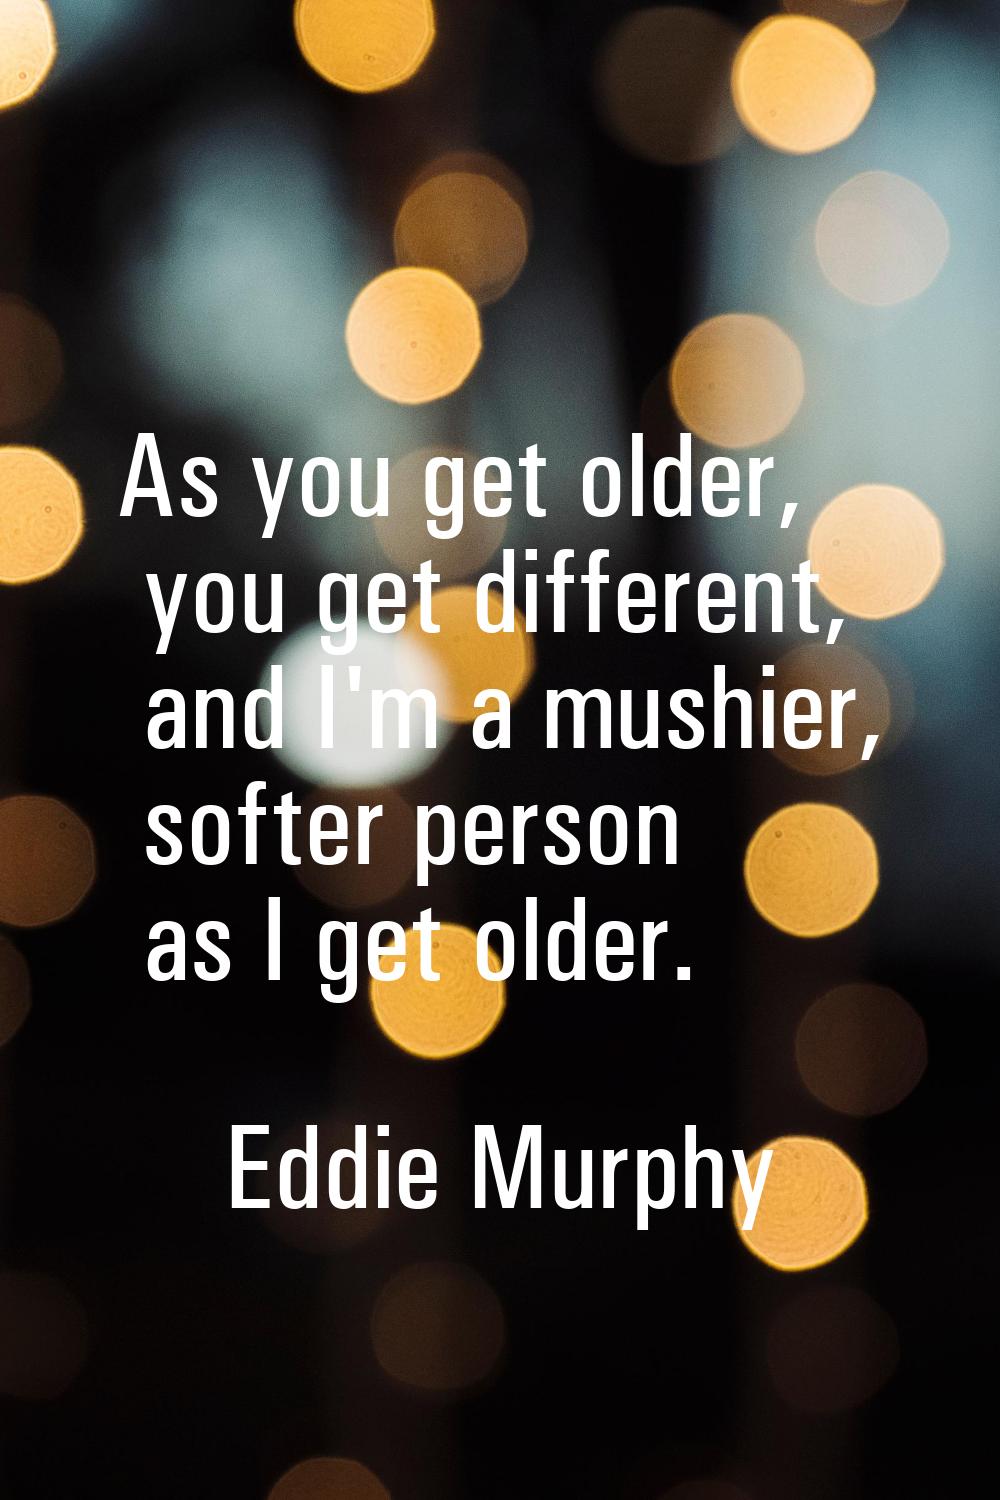 As you get older, you get different, and I'm a mushier, softer person as I get older.